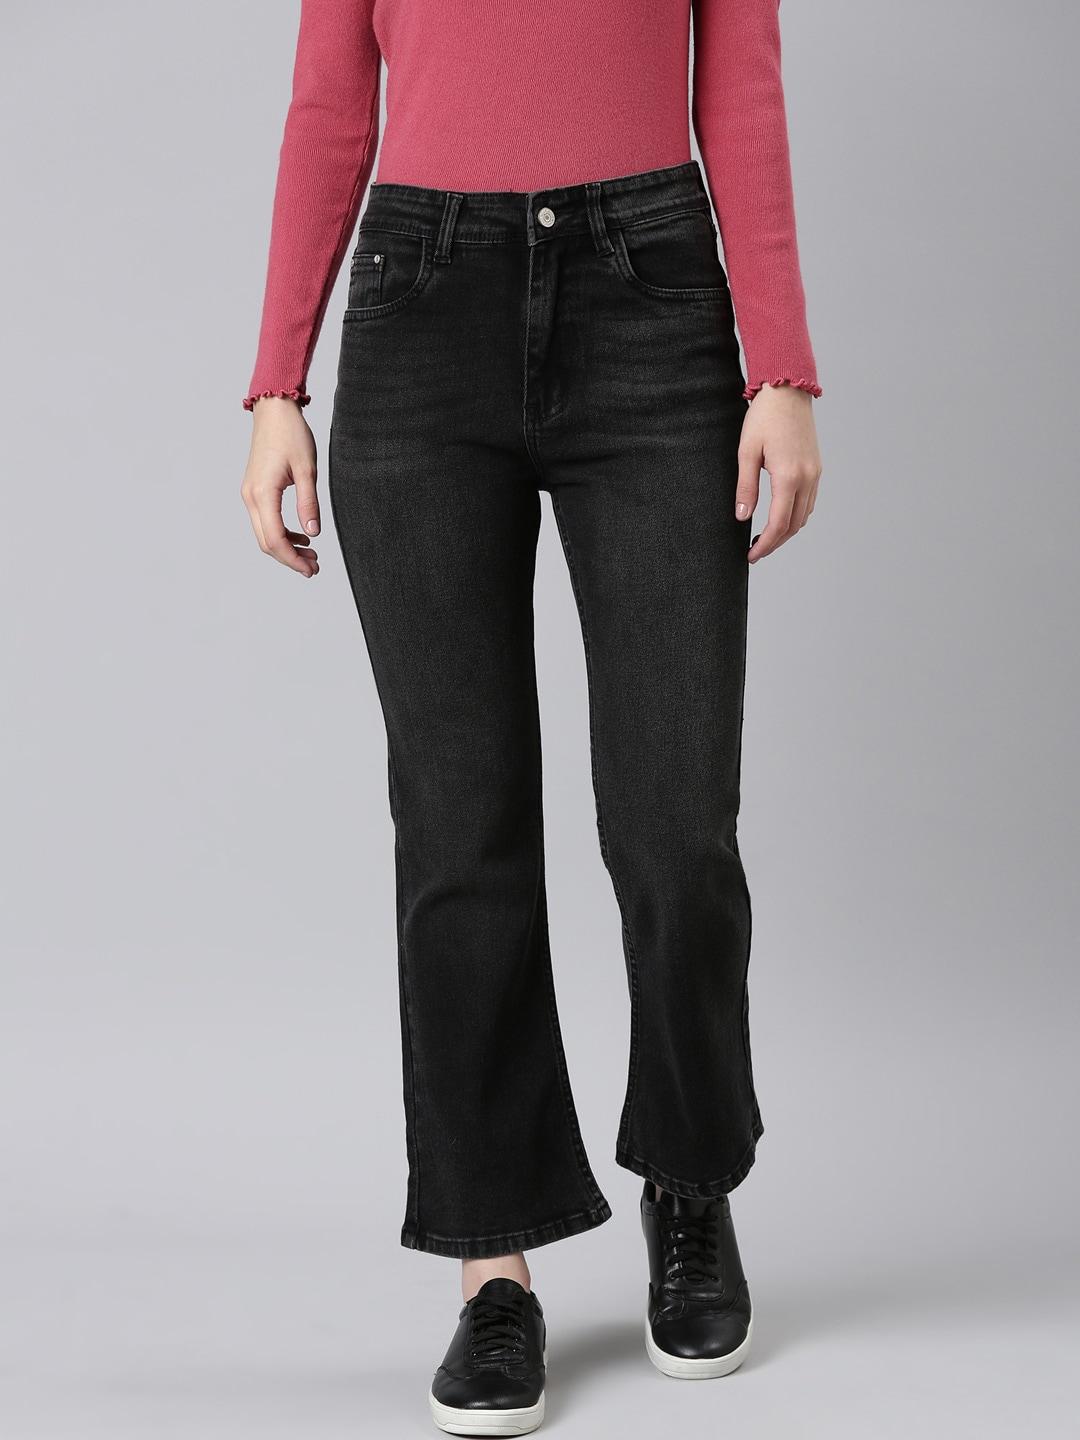 showoff-women-jean-bootcut-light-fade-acid-wash-clean-look-stretchable-jeans